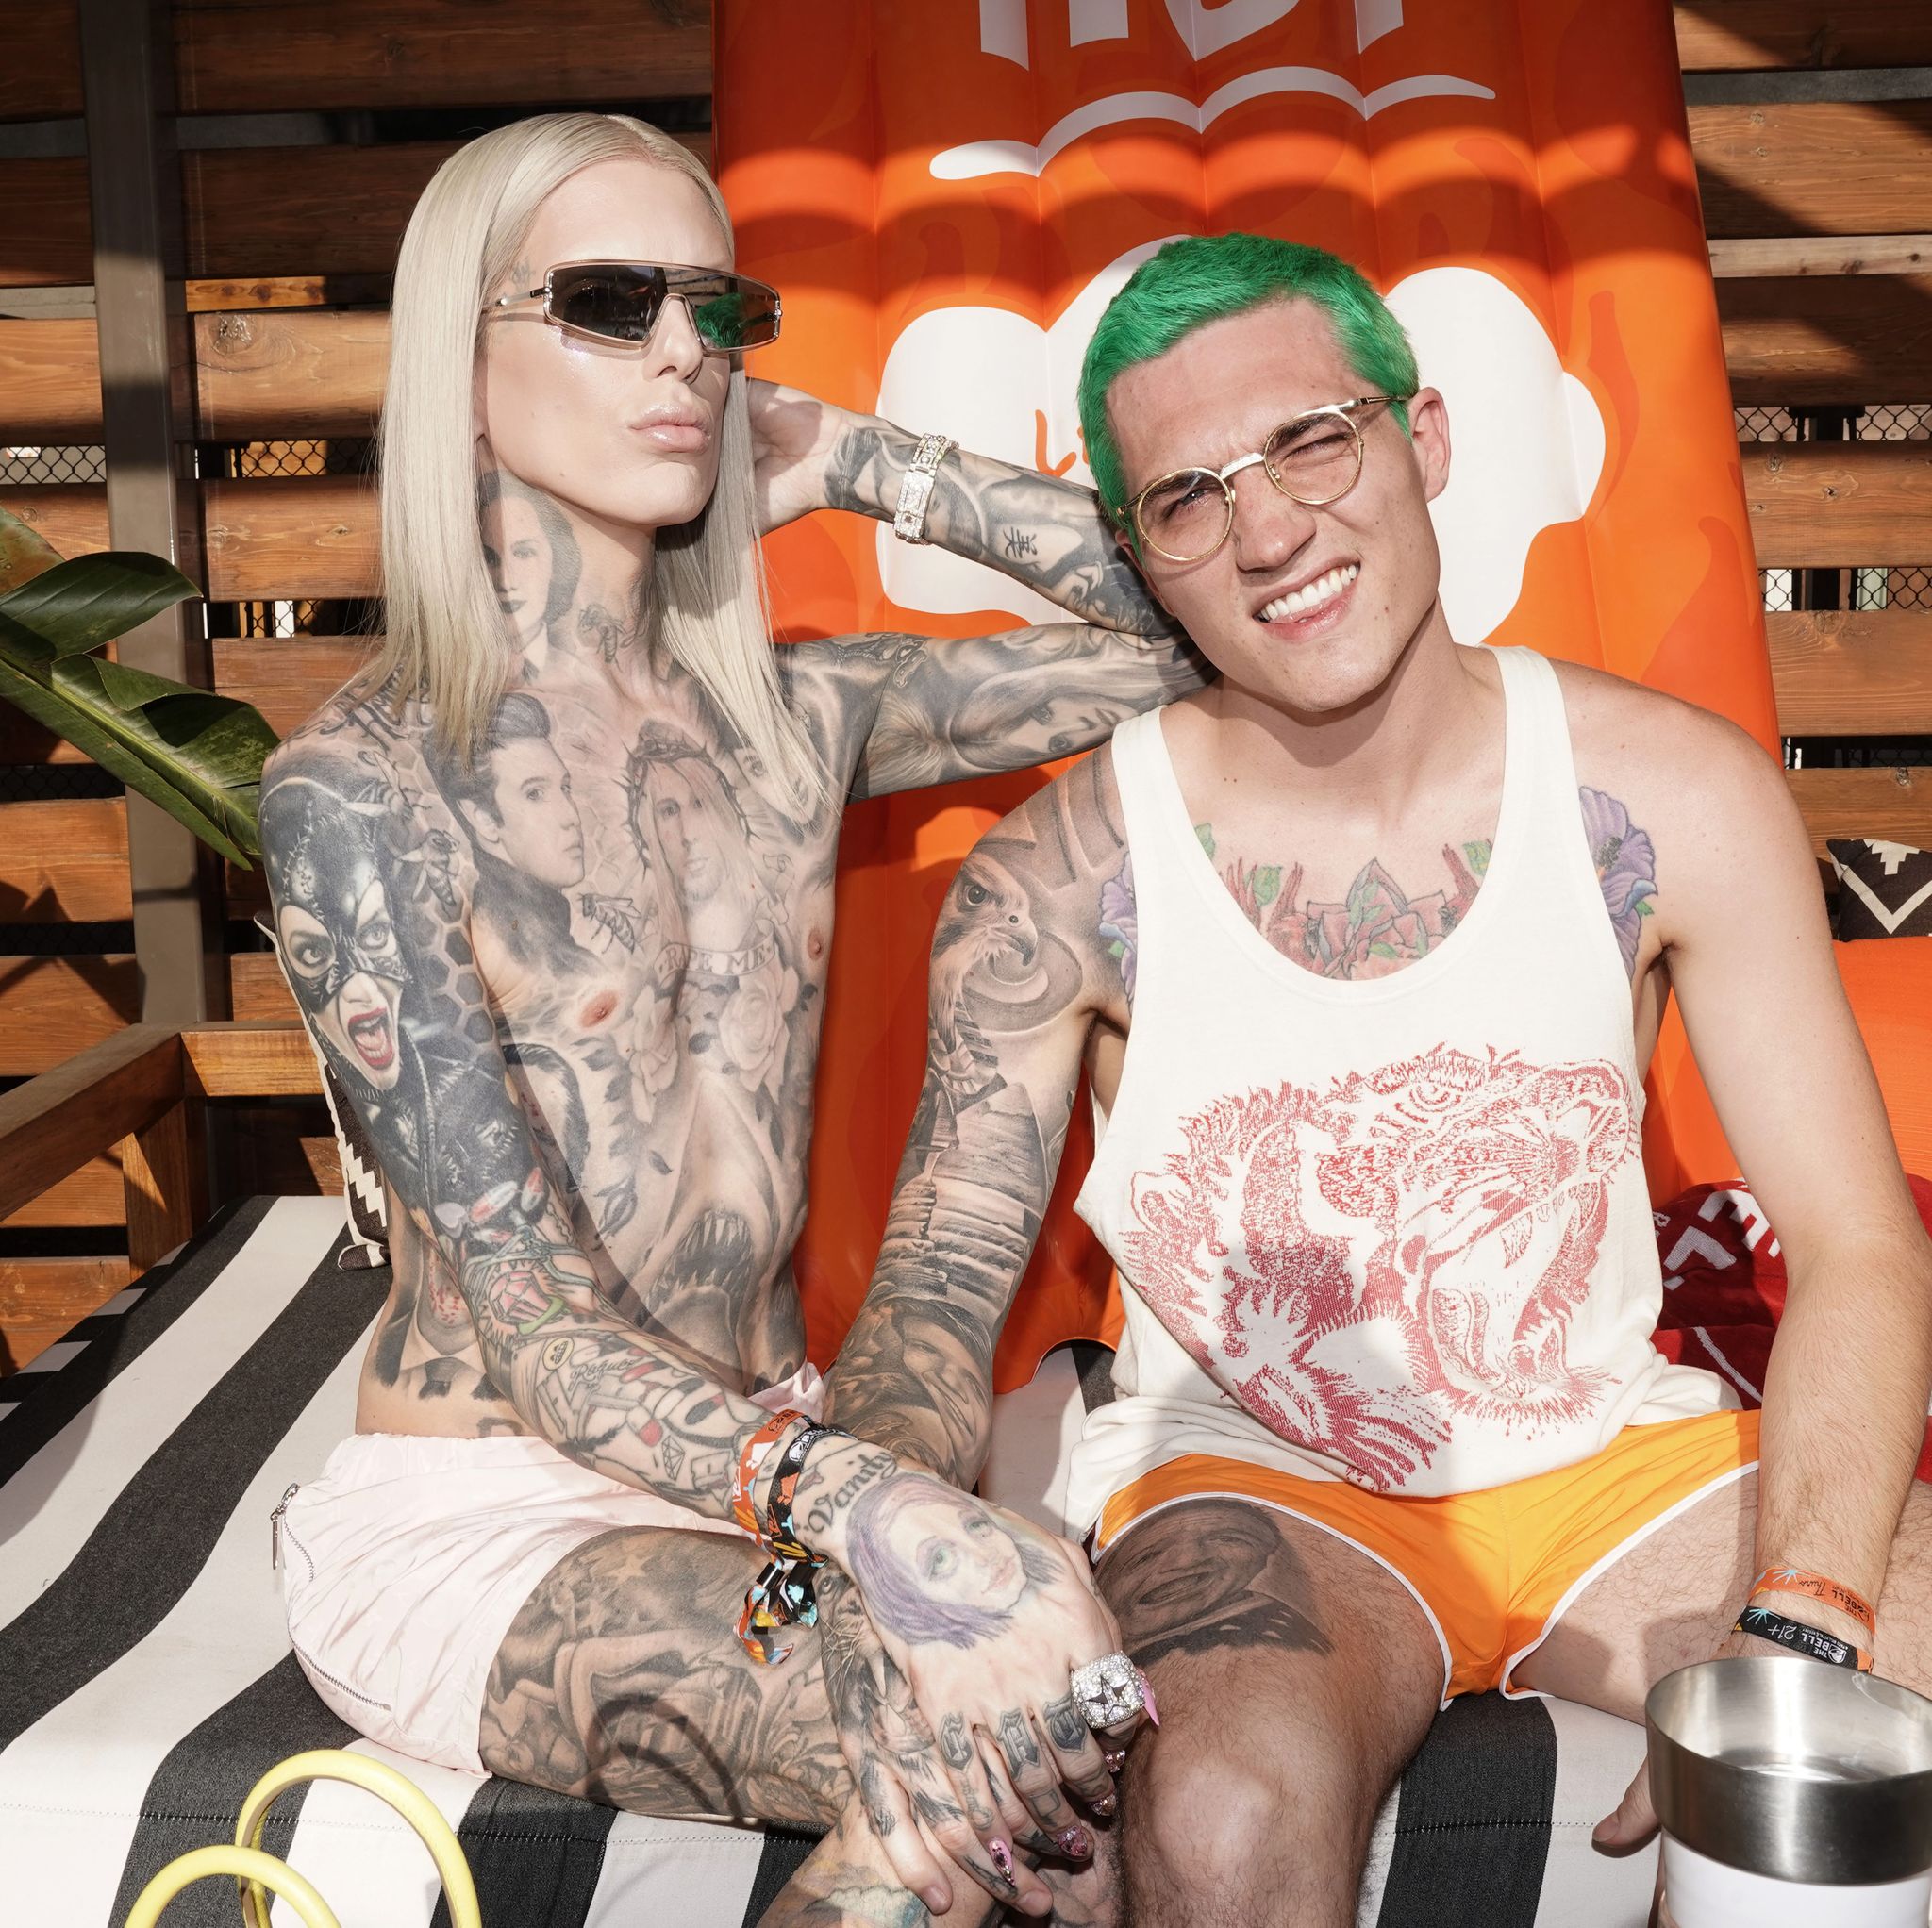 Jeffree Star Is Unrecognisable After His Dolan Twins Makeover